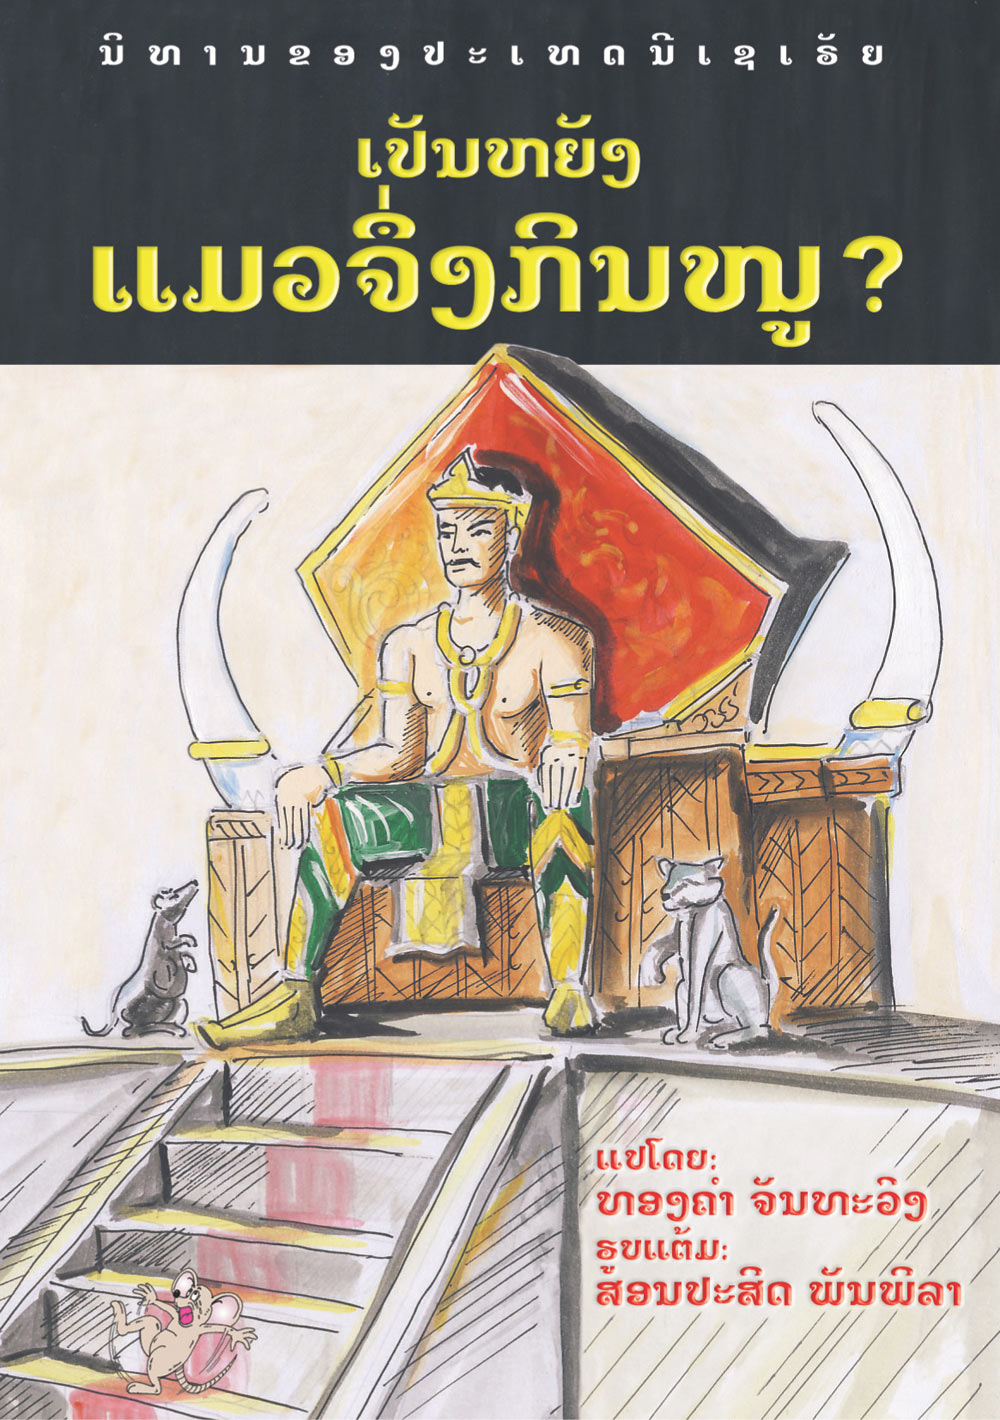 Why the Cat Kills Rats large book cover, published in Lao language